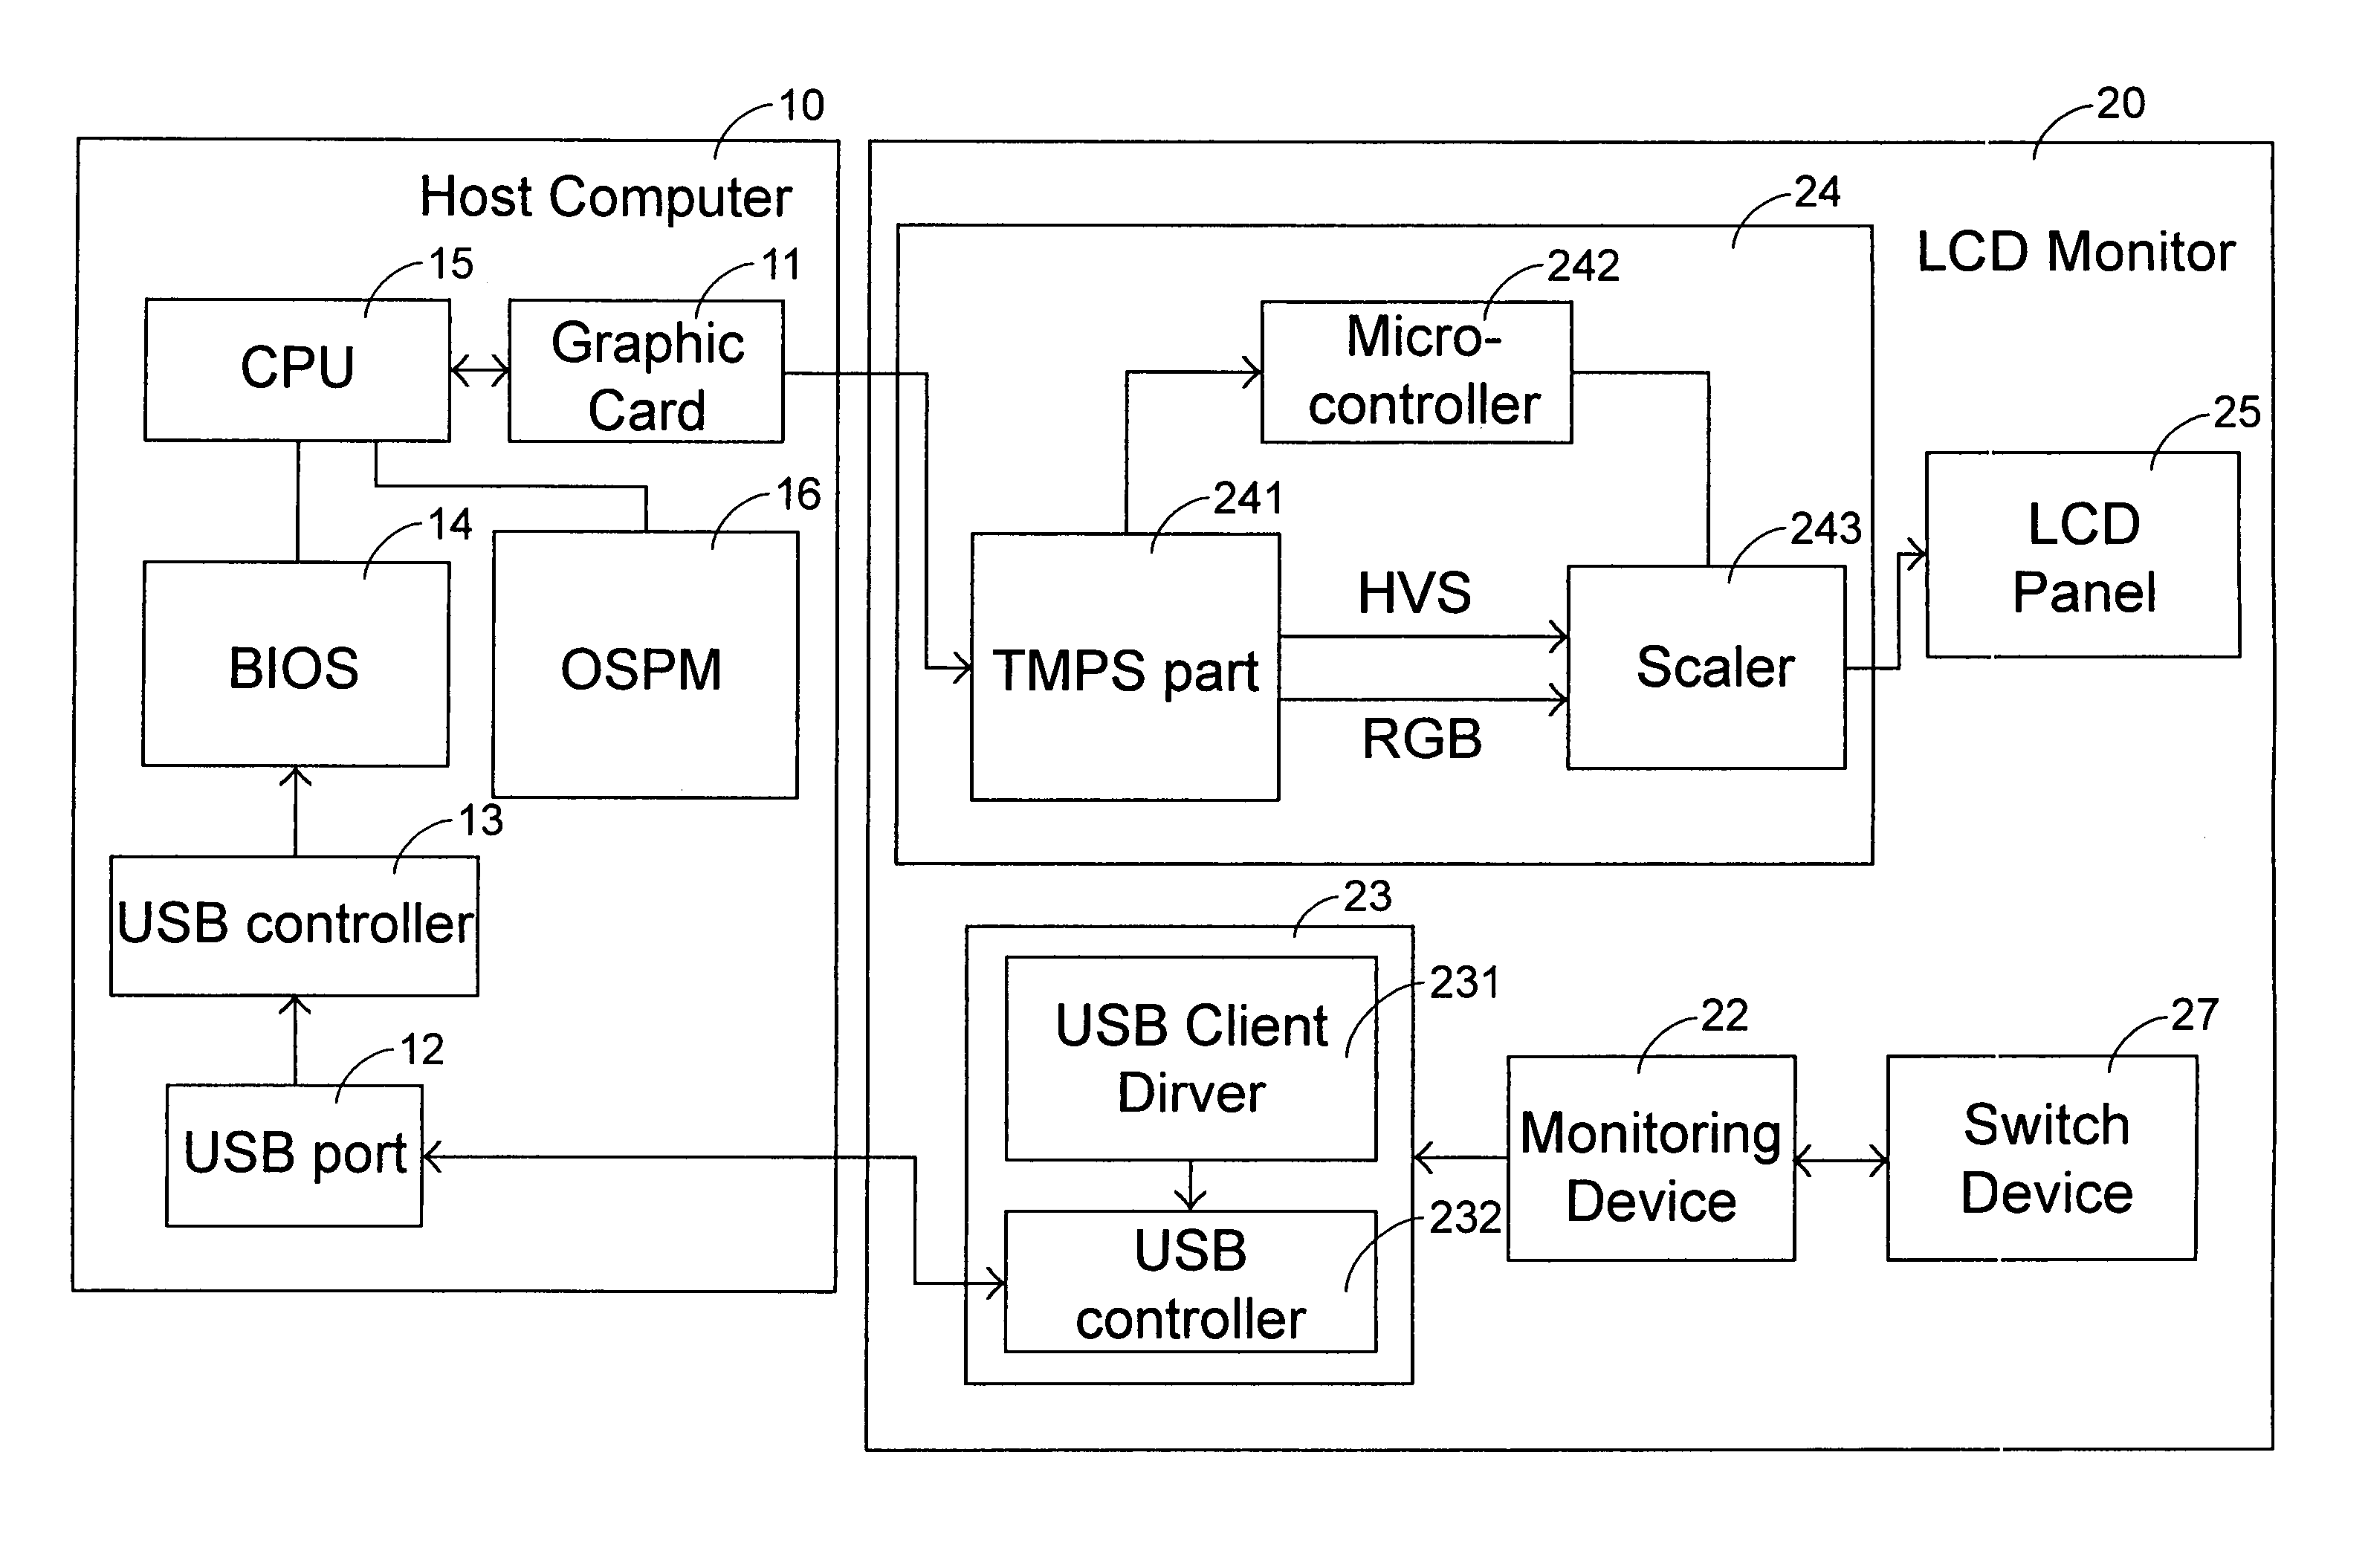 Monitor and method for controlling power-on and power-off of host computer